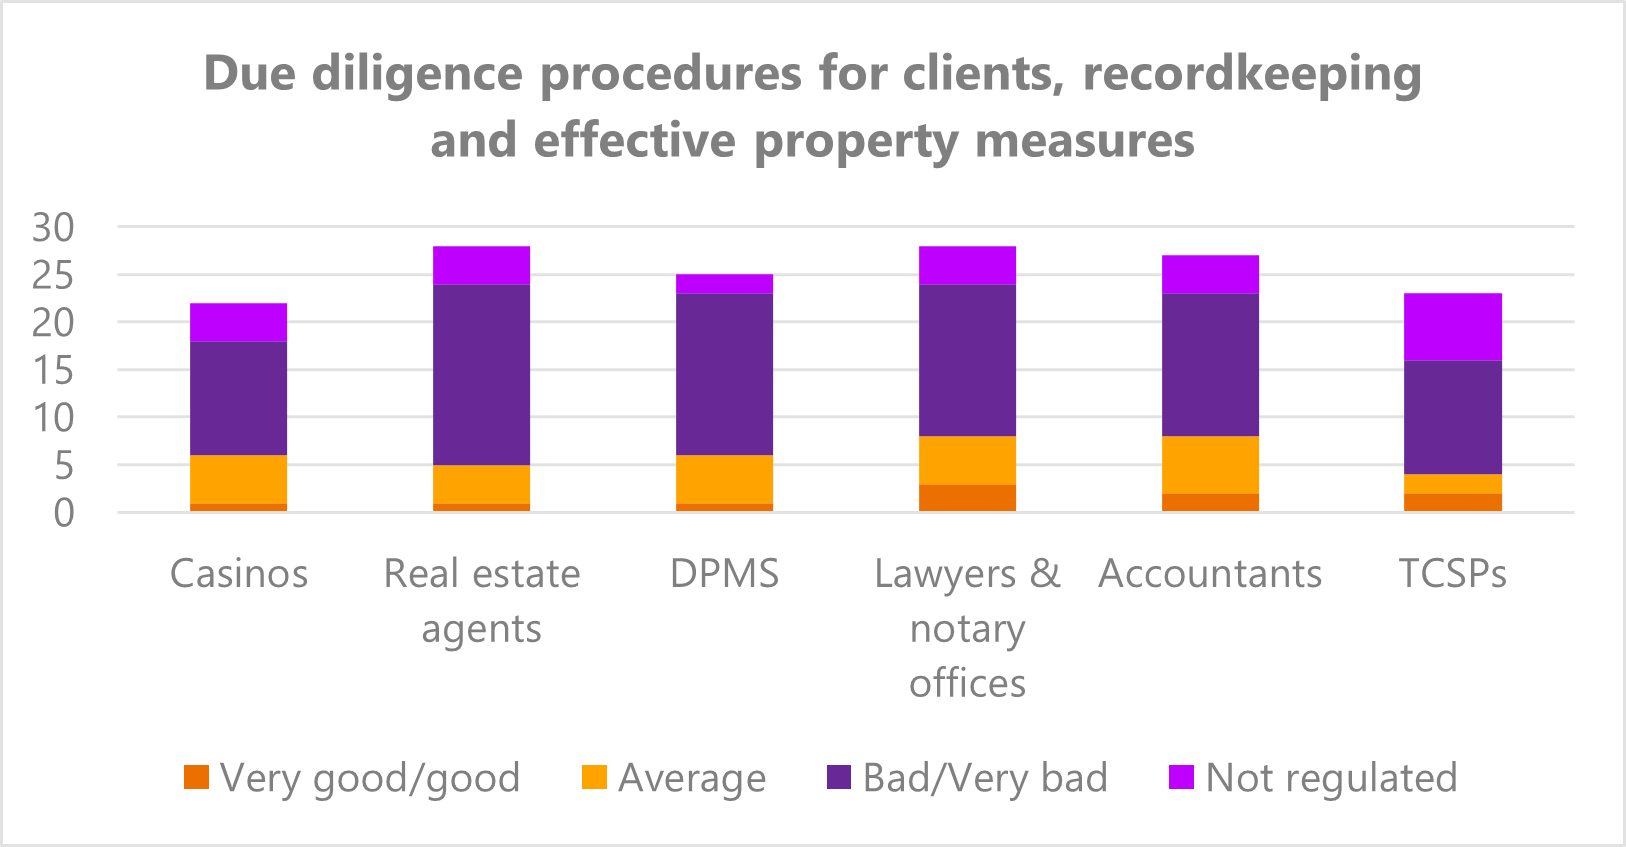 Due diligence procedures for clients, recordkeeping and effective property measures